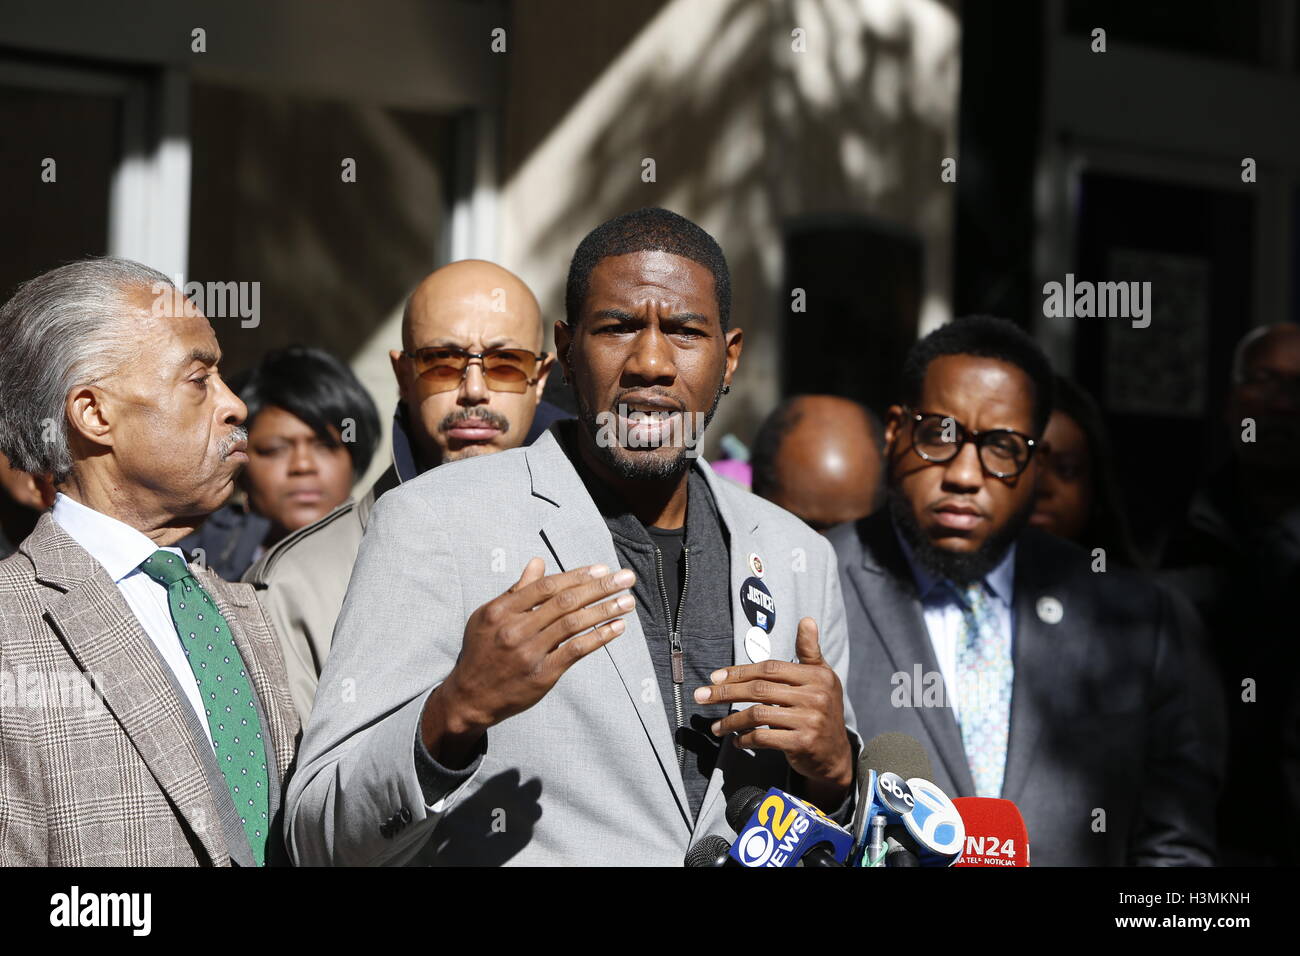 New York City, United States. 10th Oct, 2016. NY city council member Jumaane Williams addresses the press in Midtown. Rev Al Sharpton gathered with members of the NYC City Council in Midtown Manhattan to announce support for Haitians displaced by Hurricane Matthew, & to eulogize late Kings County district attorney Ken Thompson who passed away unexpectedly from cancer the day before. Credit:  Andy Katz/Pacific Press/Alamy Live News Stock Photo